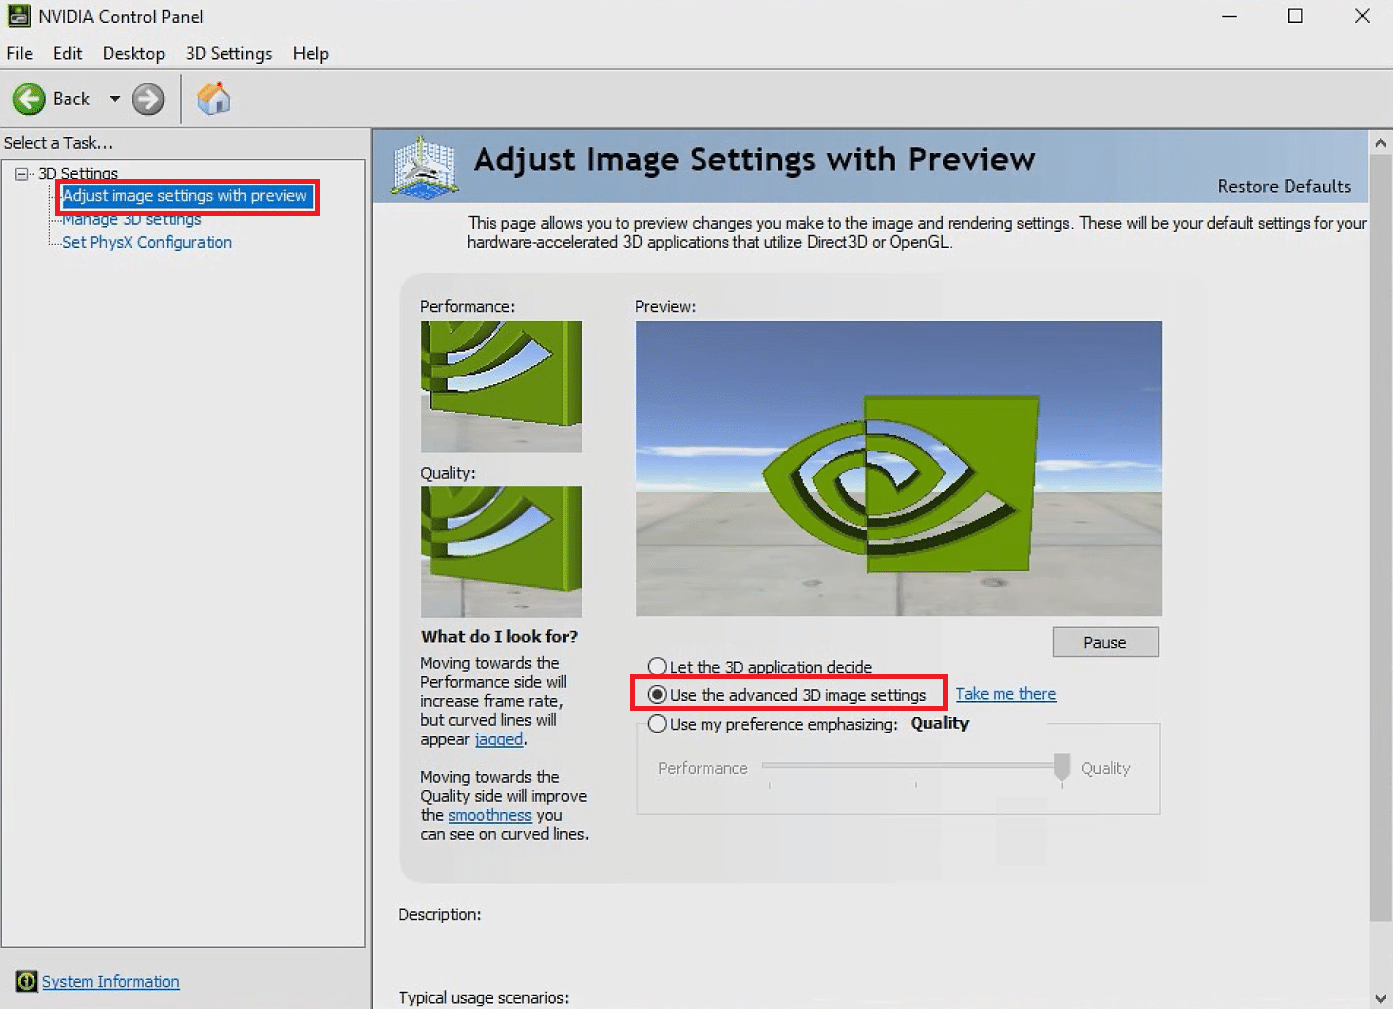 Ensure that Use the advanced 3D image settings is chosen in Adjust images settings with preview.